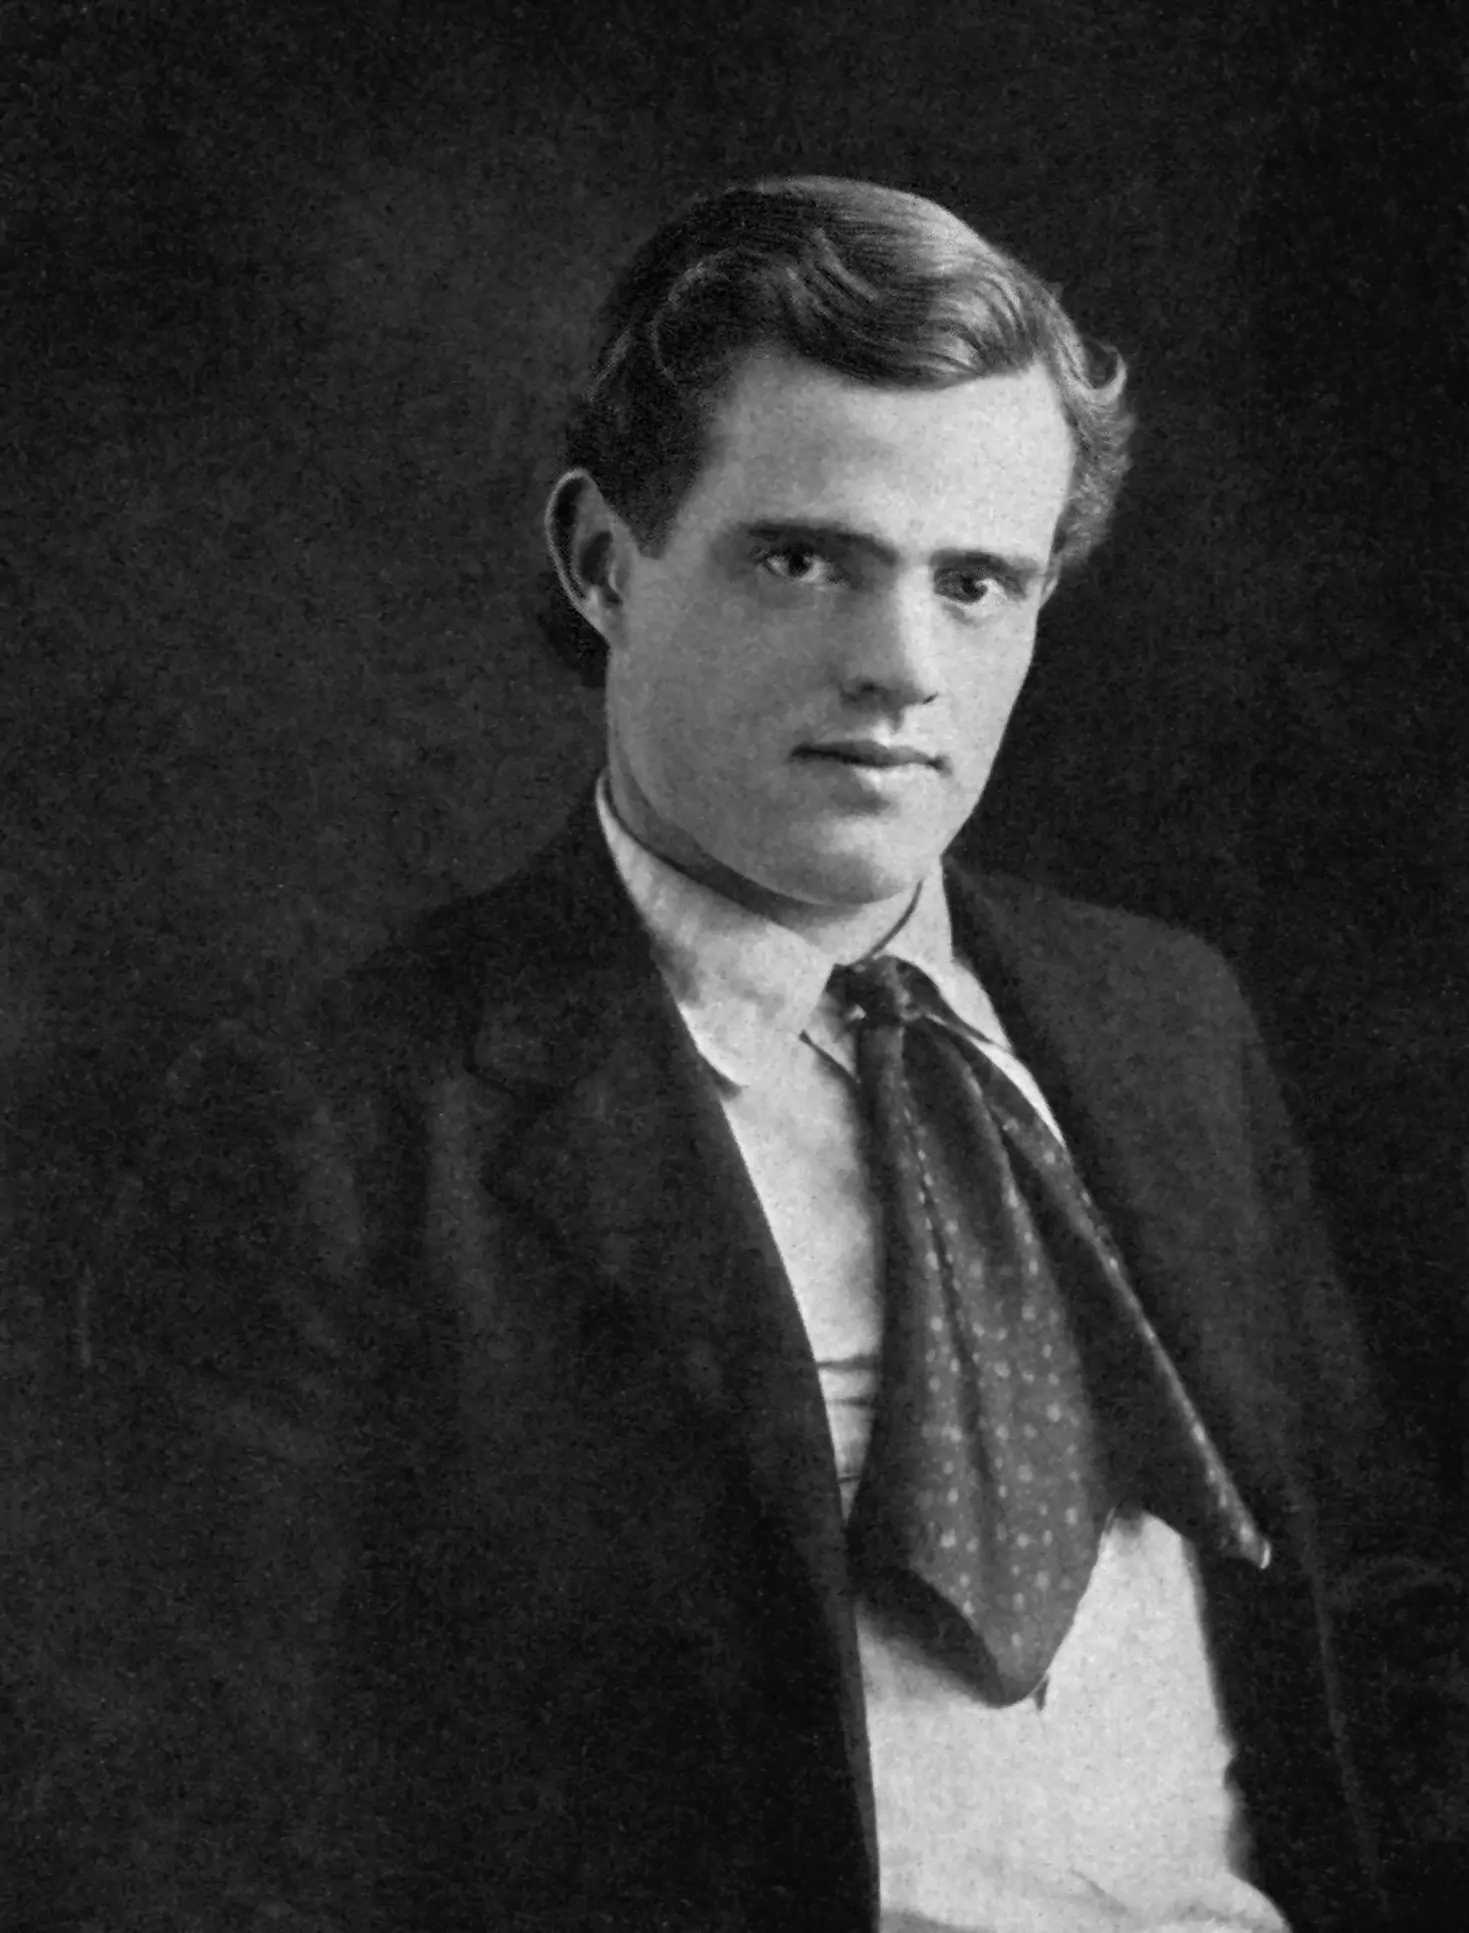 Young Jack London